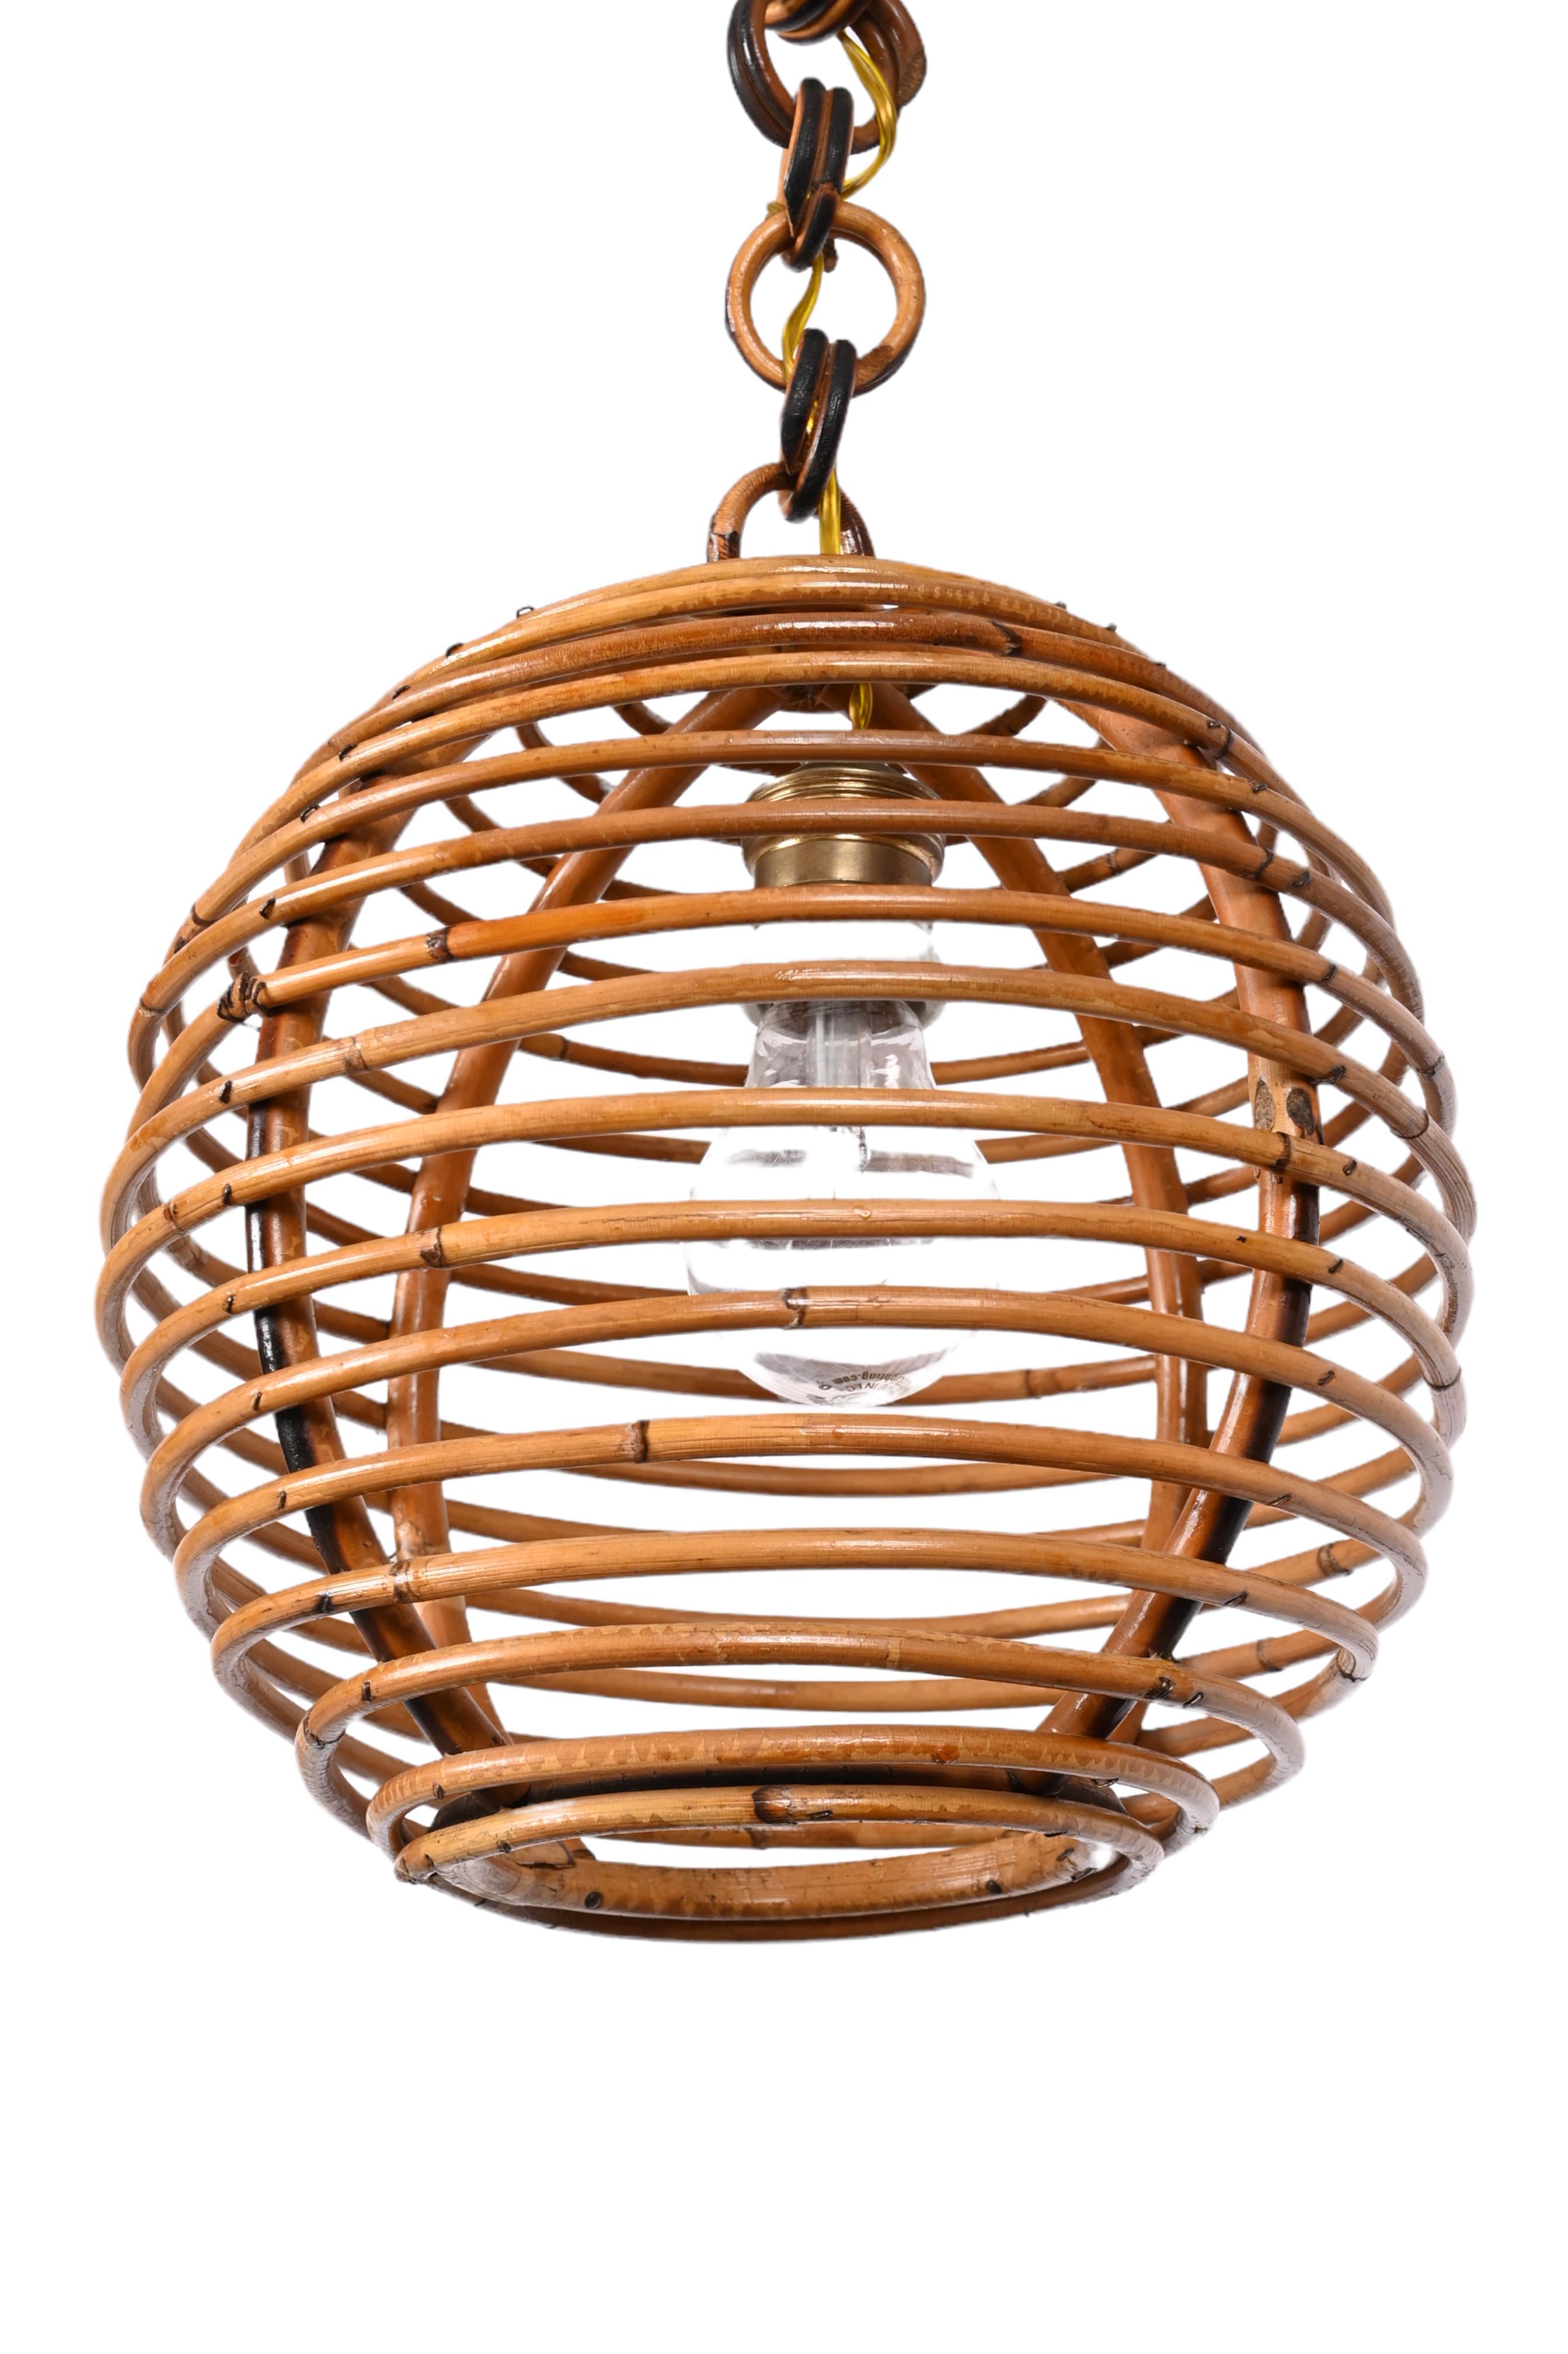 Midcentury French Riviera Bambo and Rattan Spherical Italian Chandelier, 1960s In Good Condition For Sale In Roma, IT